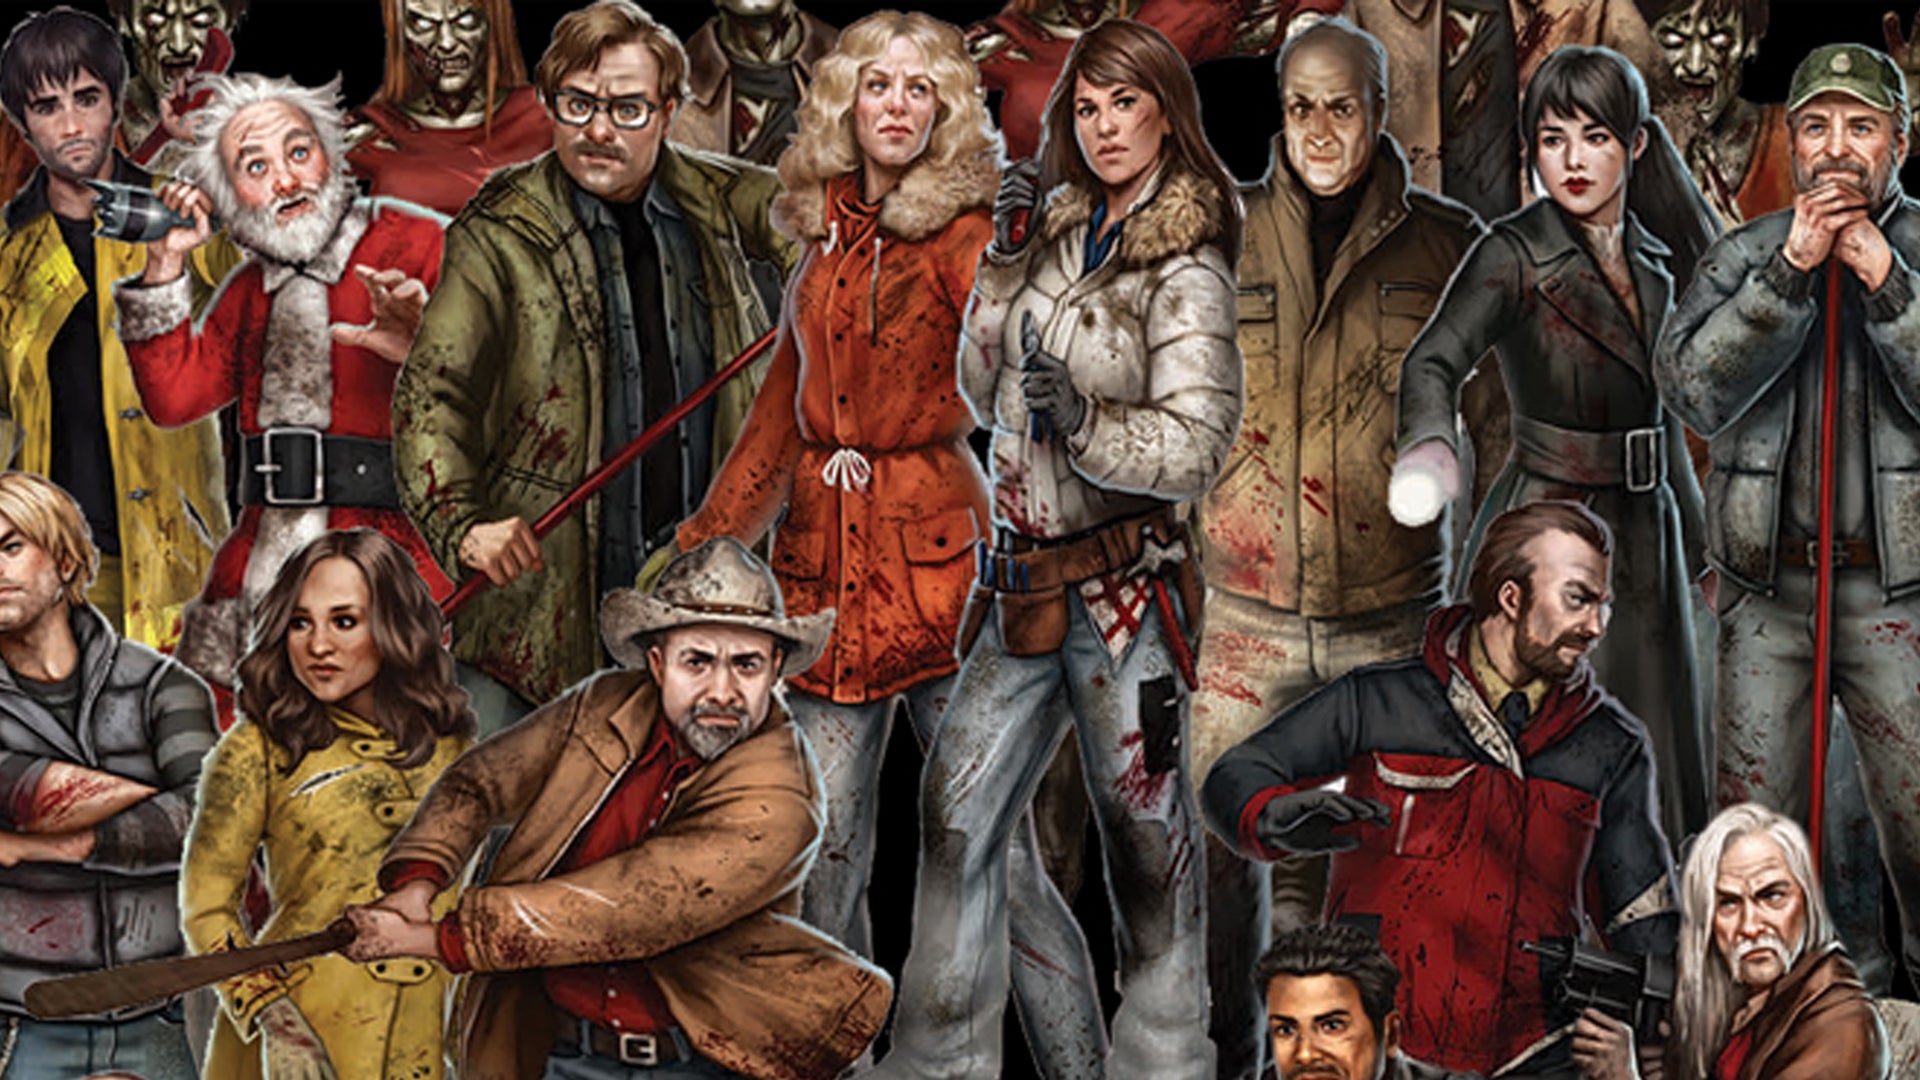 Dead of Winter bridges the intimidating gap between casual and